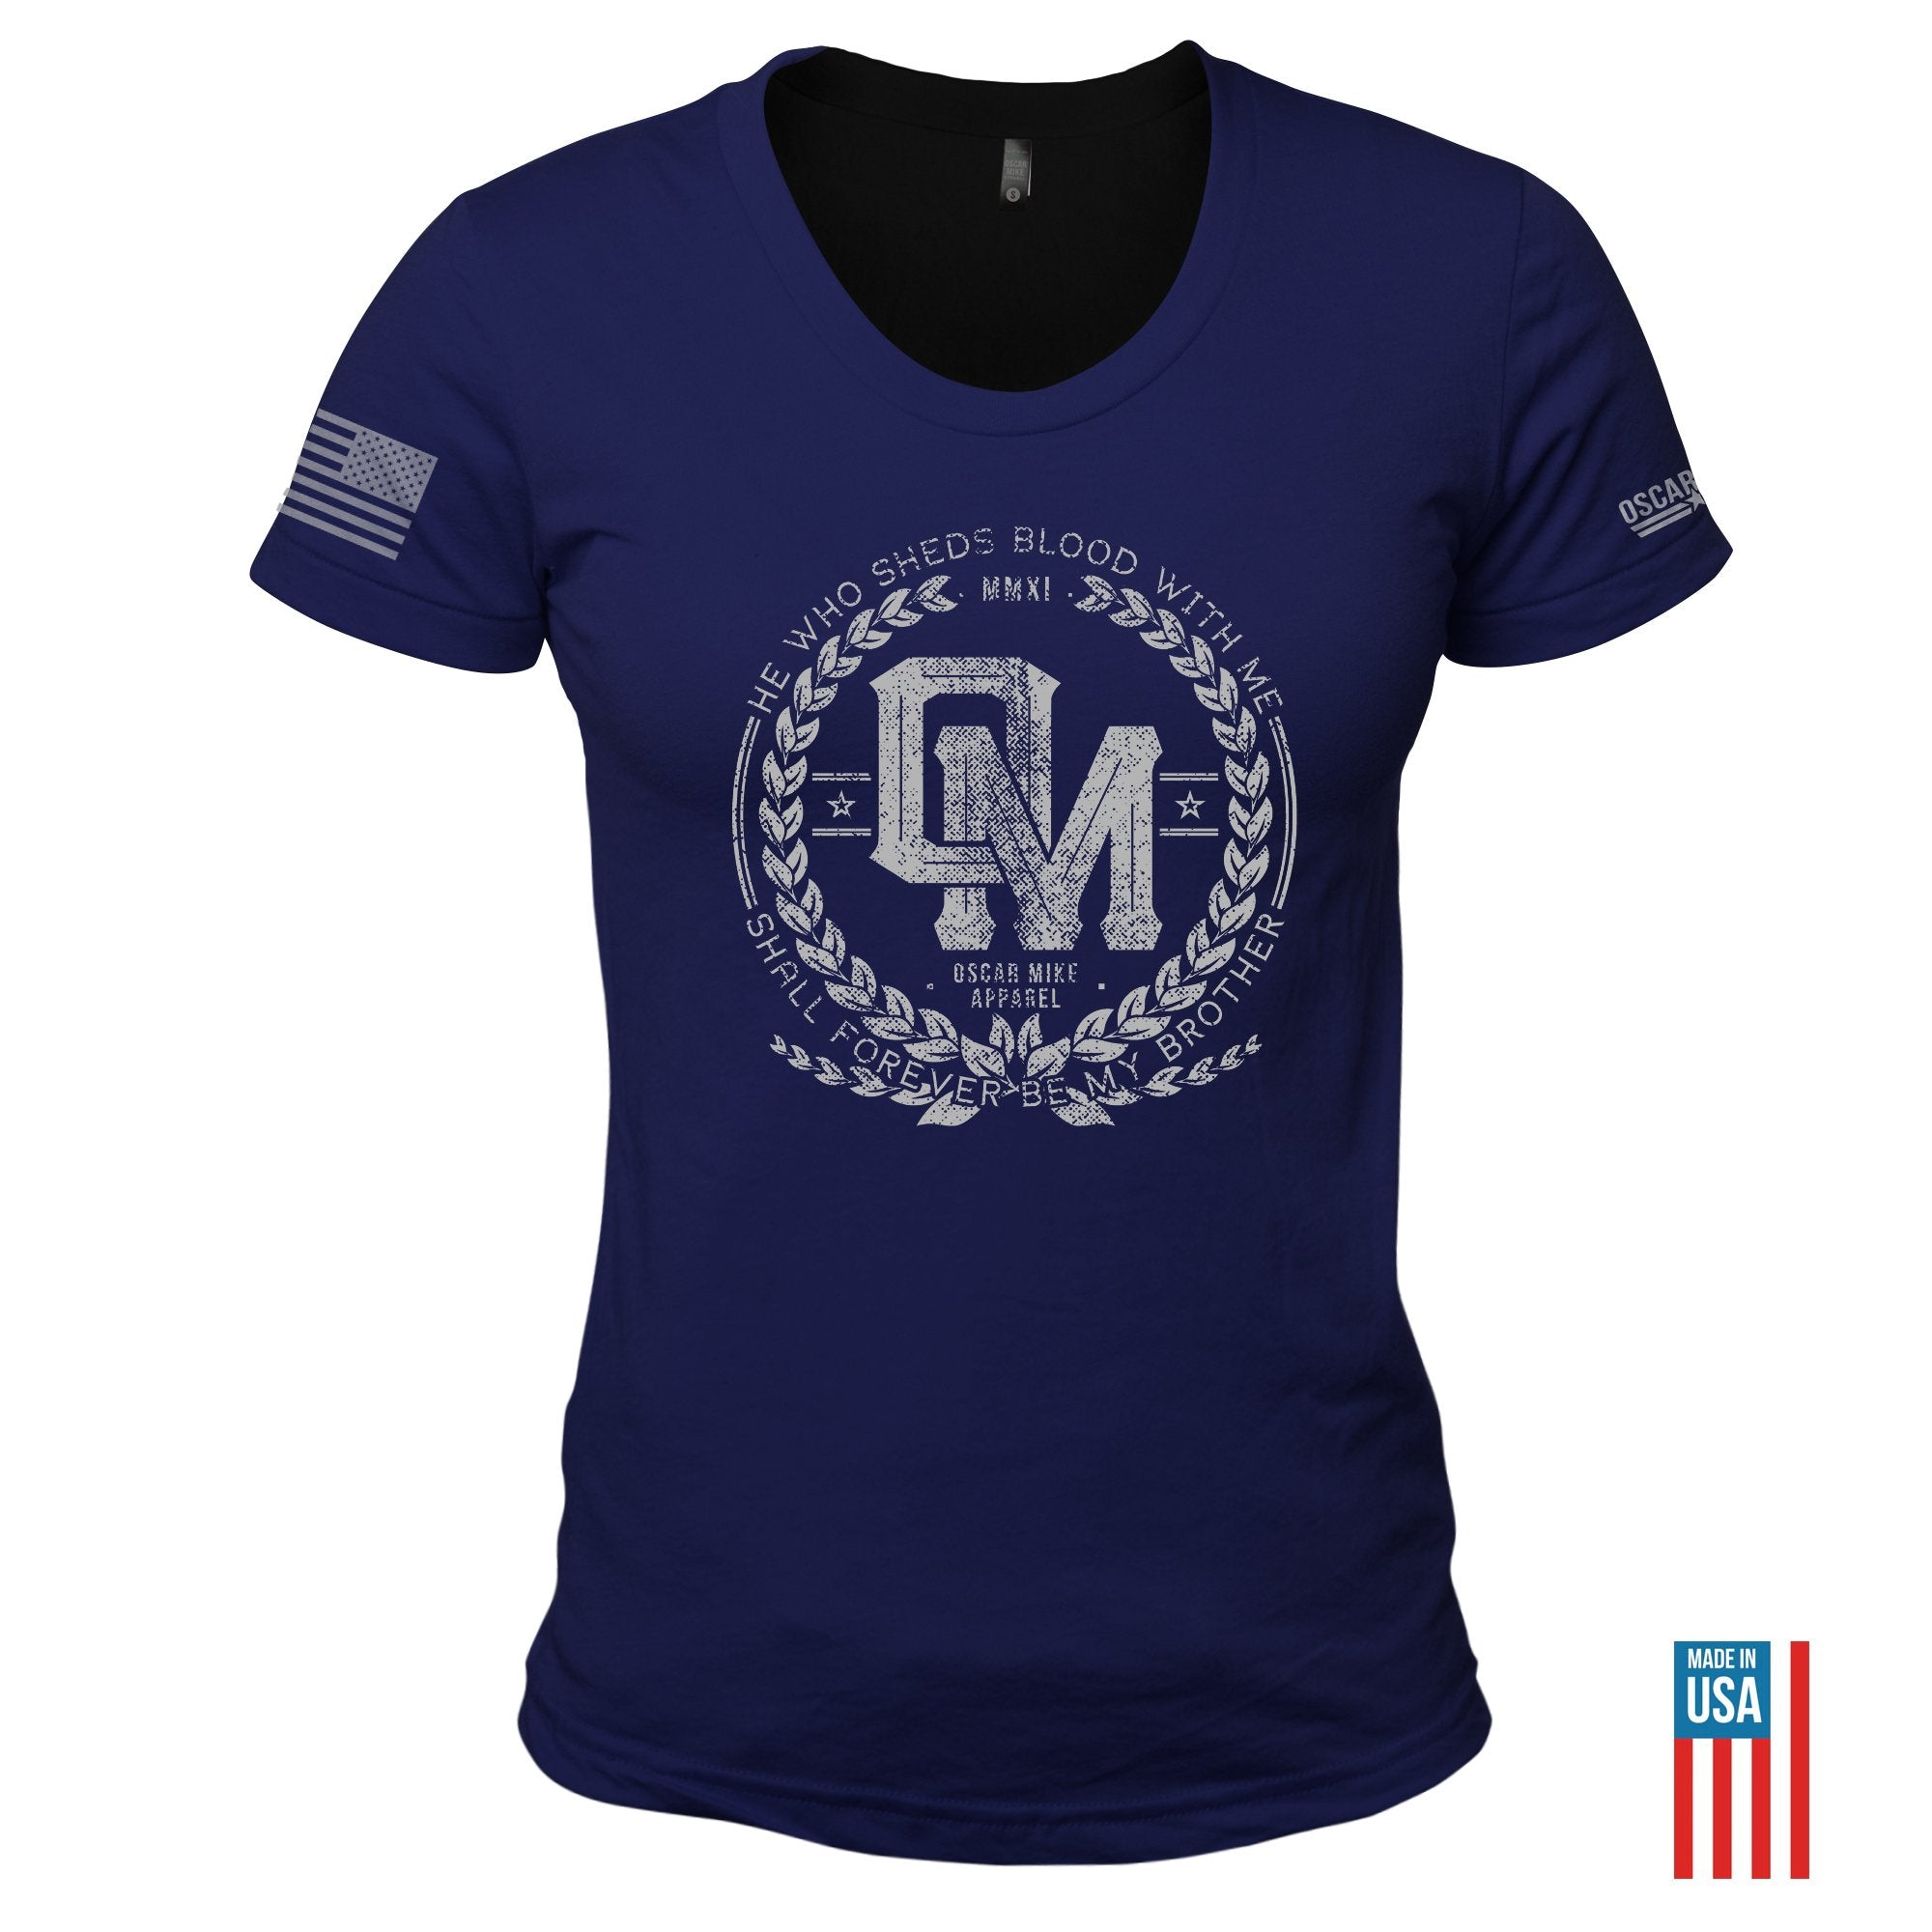 Women's OM Creed Tee T-Shirt from Oscar Mike Apparel